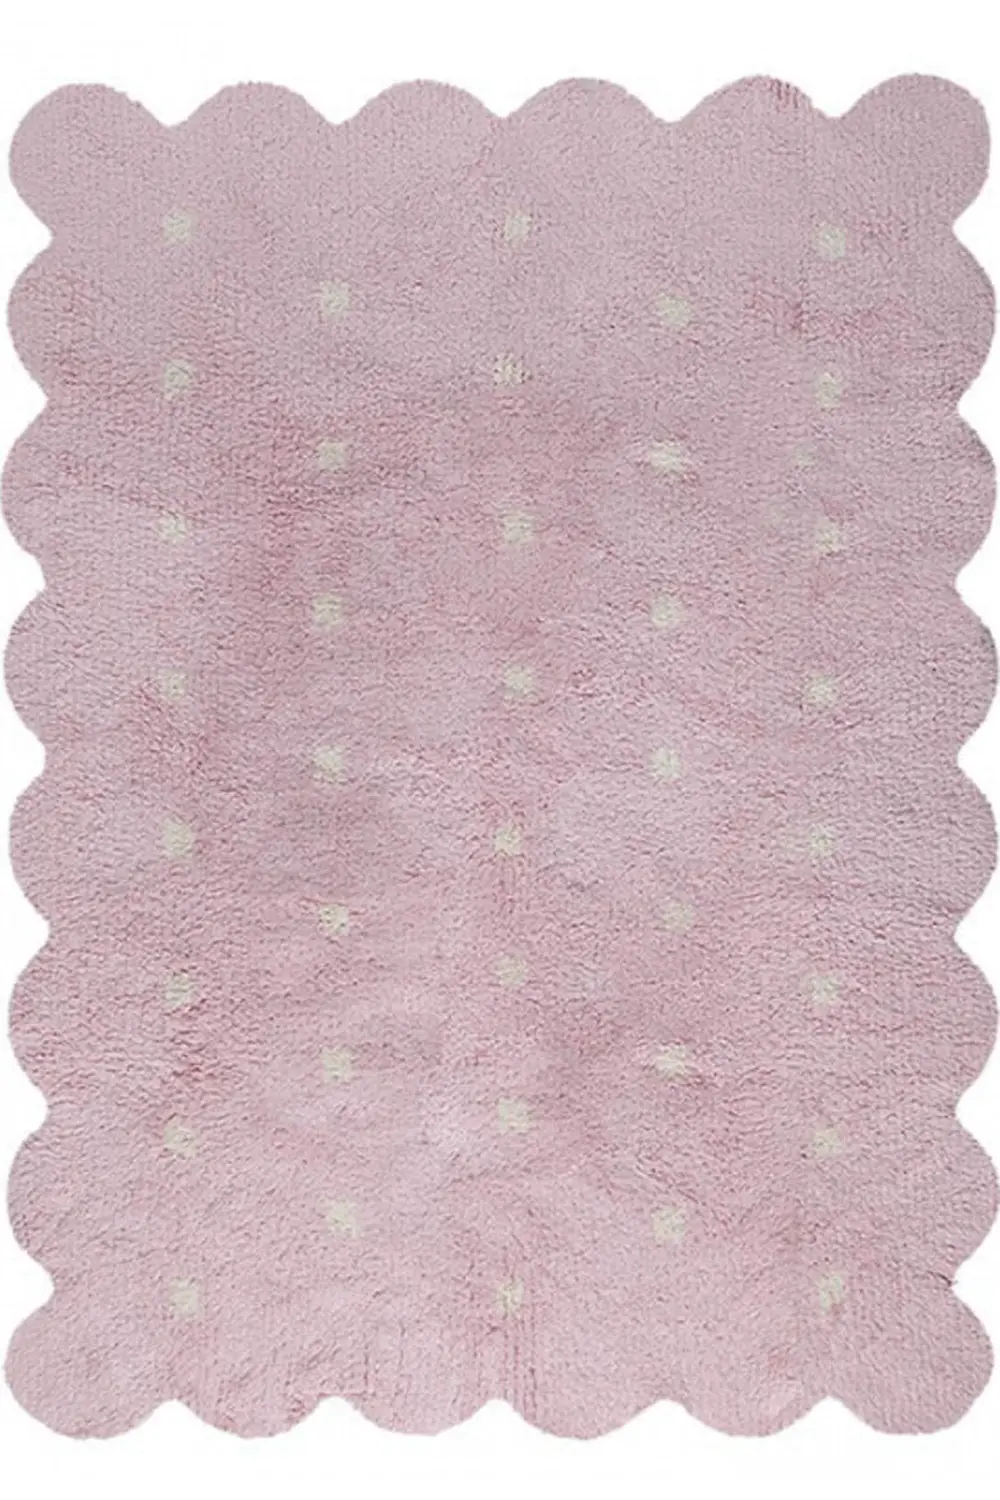 C-77771 4 x 5 Small Biscuit Pink Washable Rug-1